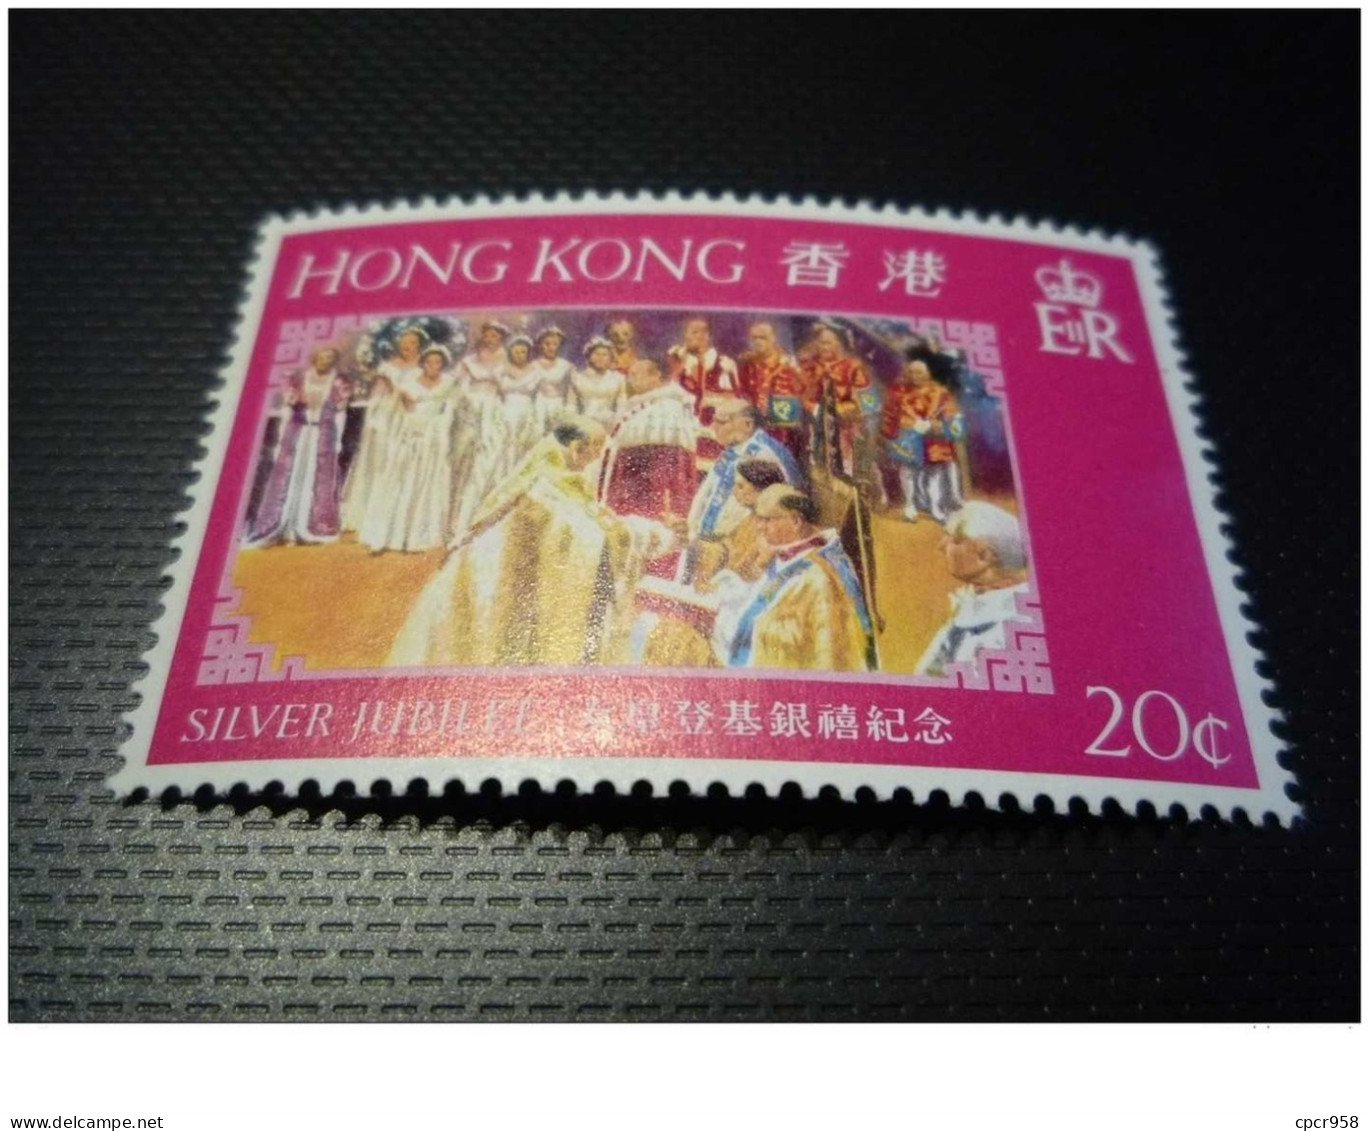 TIMBRES.n°28598.HONG KONG. - Unused Stamps